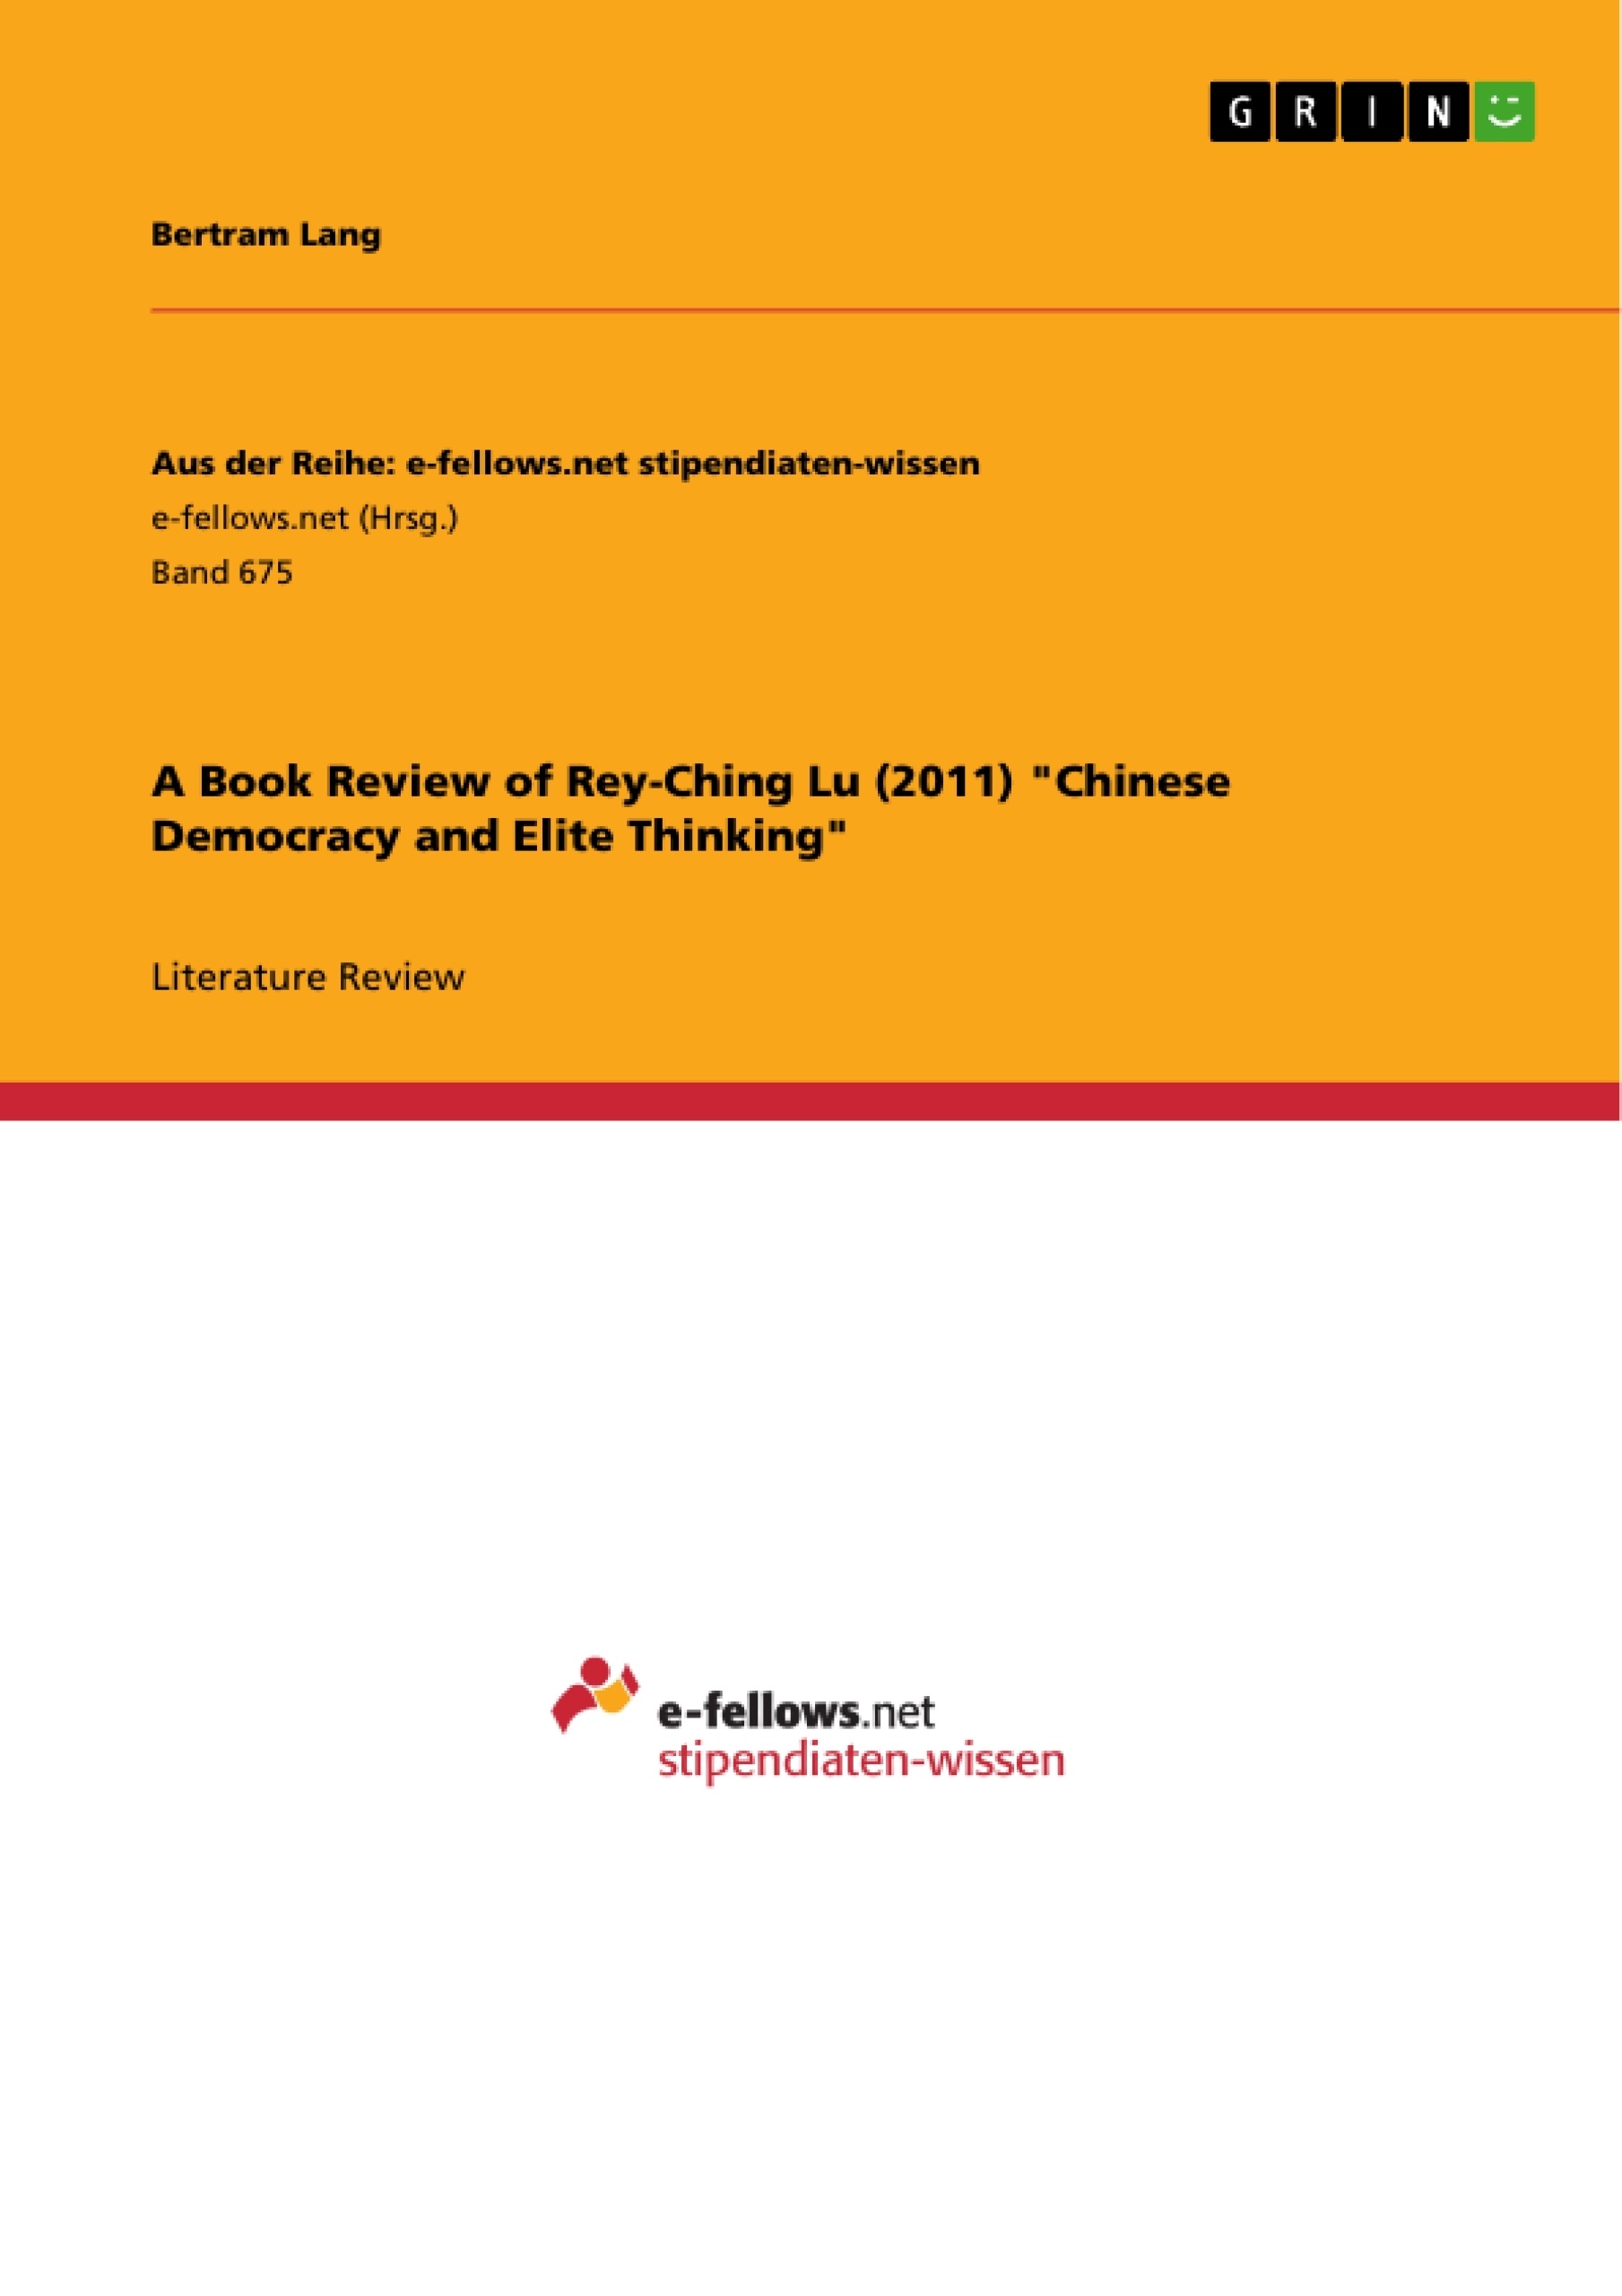 Title: A Book Review of Rey-Ching Lu (2011) "Chinese Democracy and Elite Thinking"